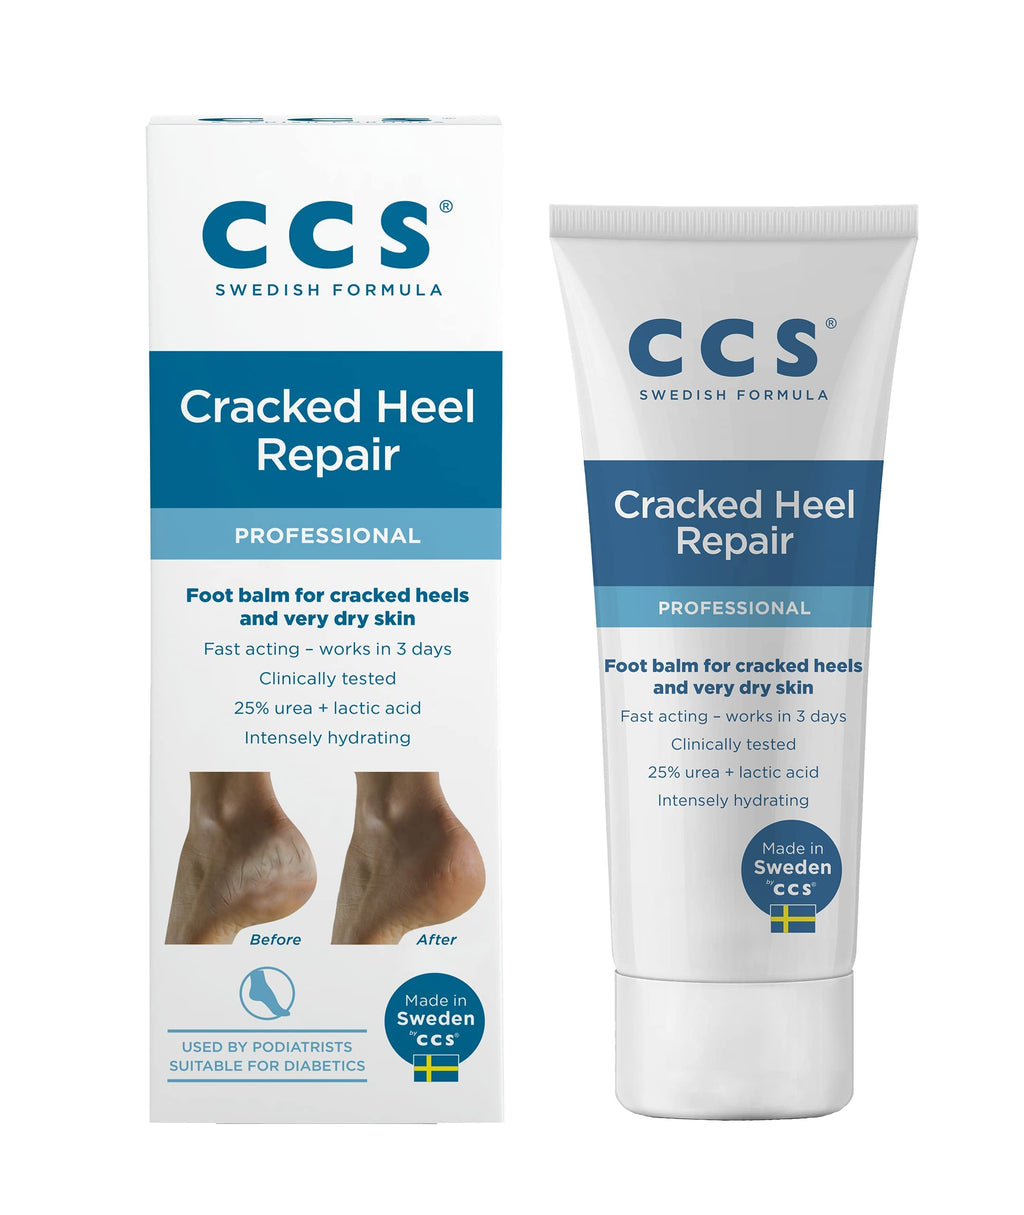 [Australia] - CCS Cracked Heel Repair Balm 75 ml - Visible Results In 3 Days For Cracked Heels and Very Dry Feet, Contains 25% Urea and Lactic Acid, Clinically Tested 